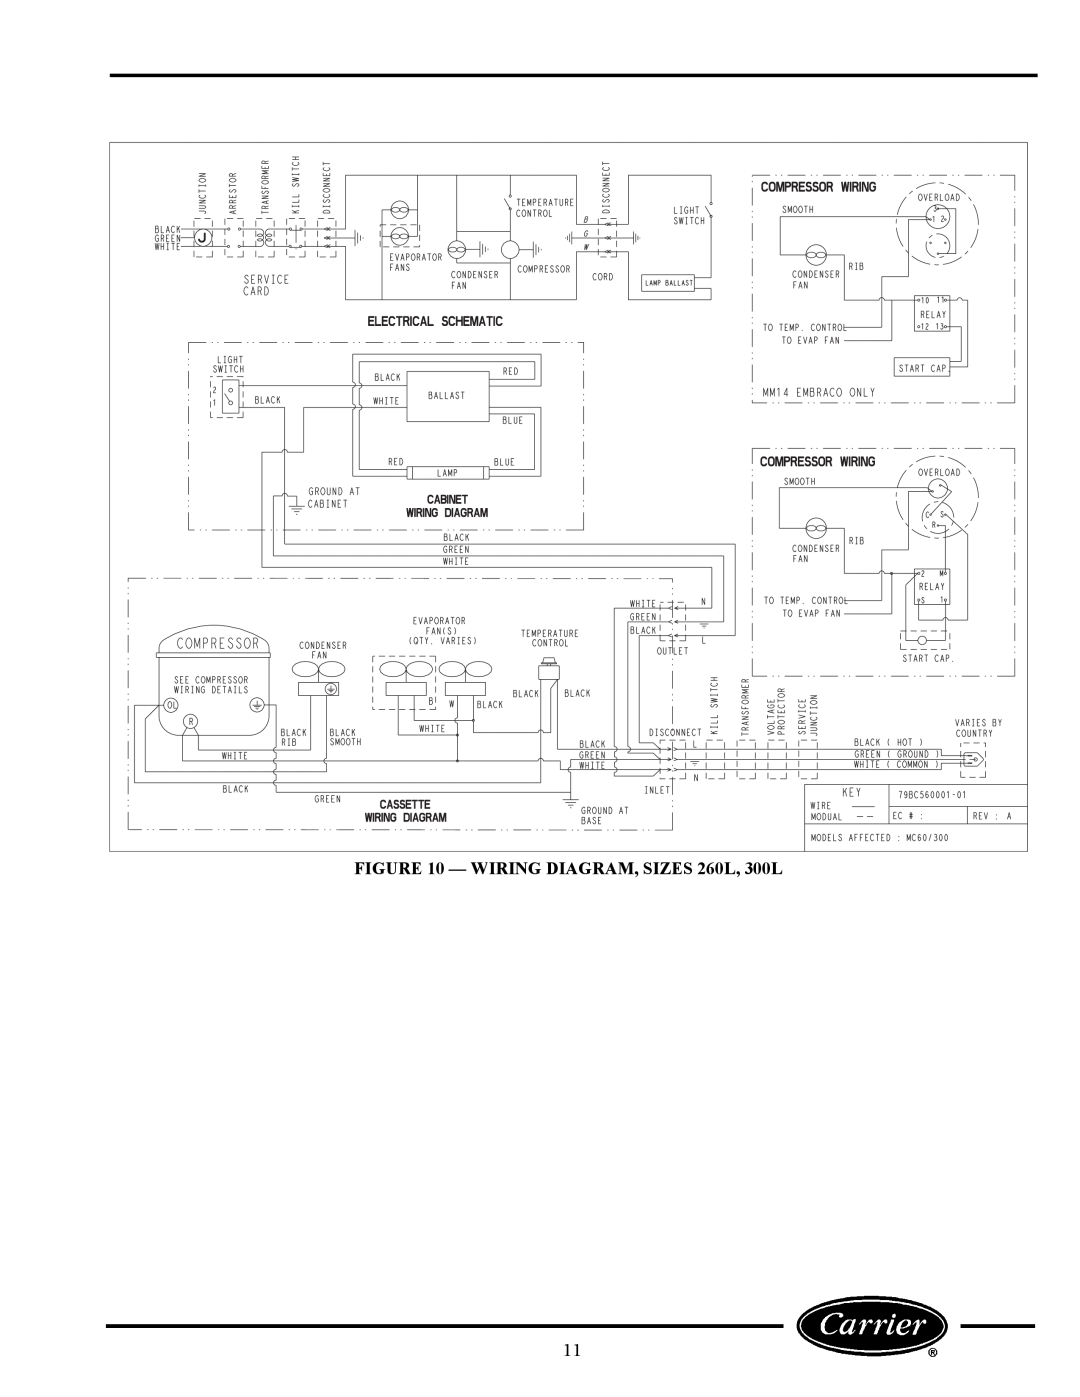 Carrier 1300L owner manual WIRING DIAGRAM, SIZES 260L, 300L, a79-10 